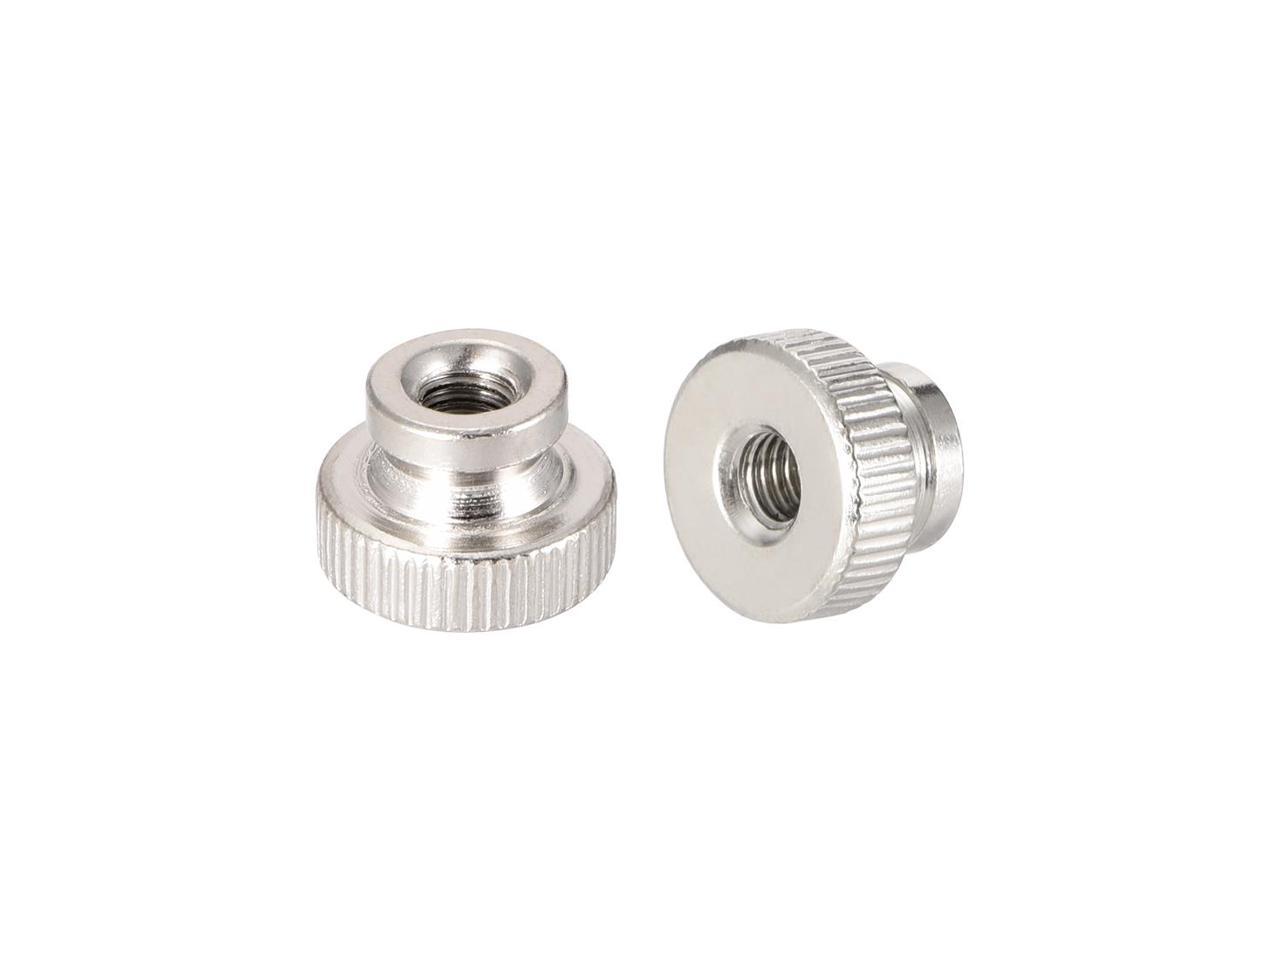 Nickel Plating Pack of 20 M3 Round Knobs with Collar uxcell Knurled Thumb Nuts